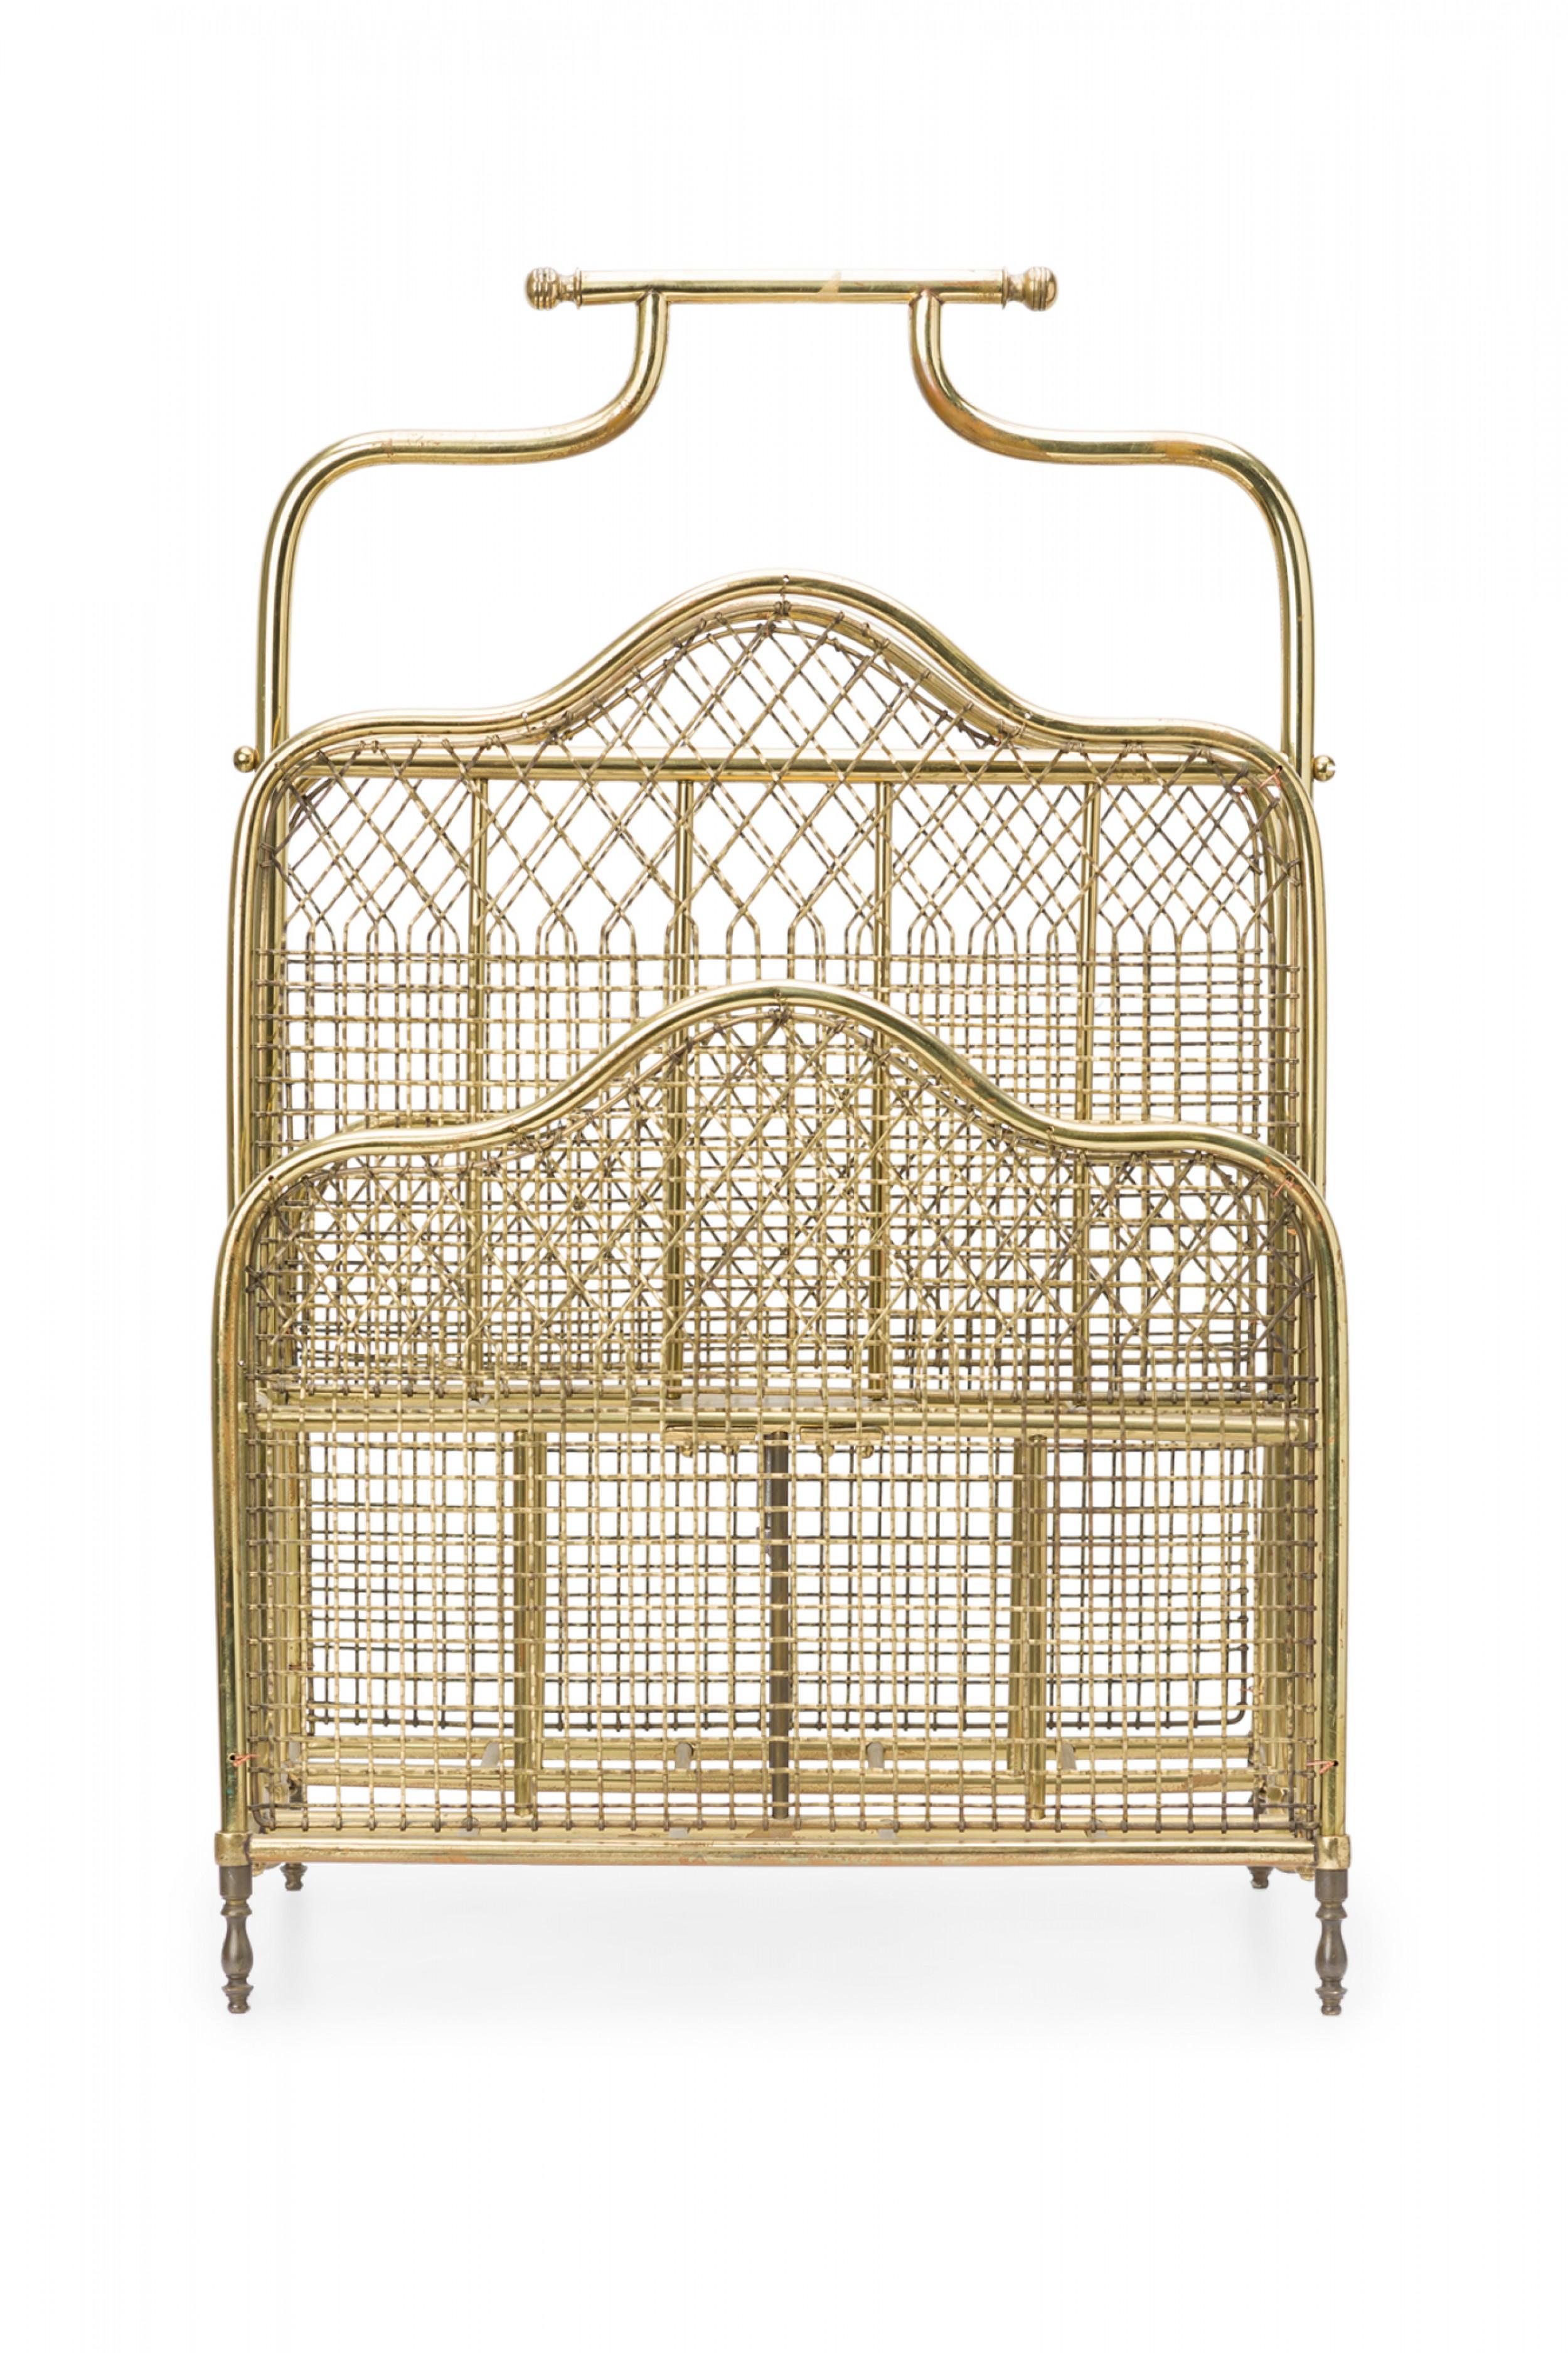 English Victorian-style magazine rack with a brass frame and handle and three tiered compartments walled with brass grid mesh.